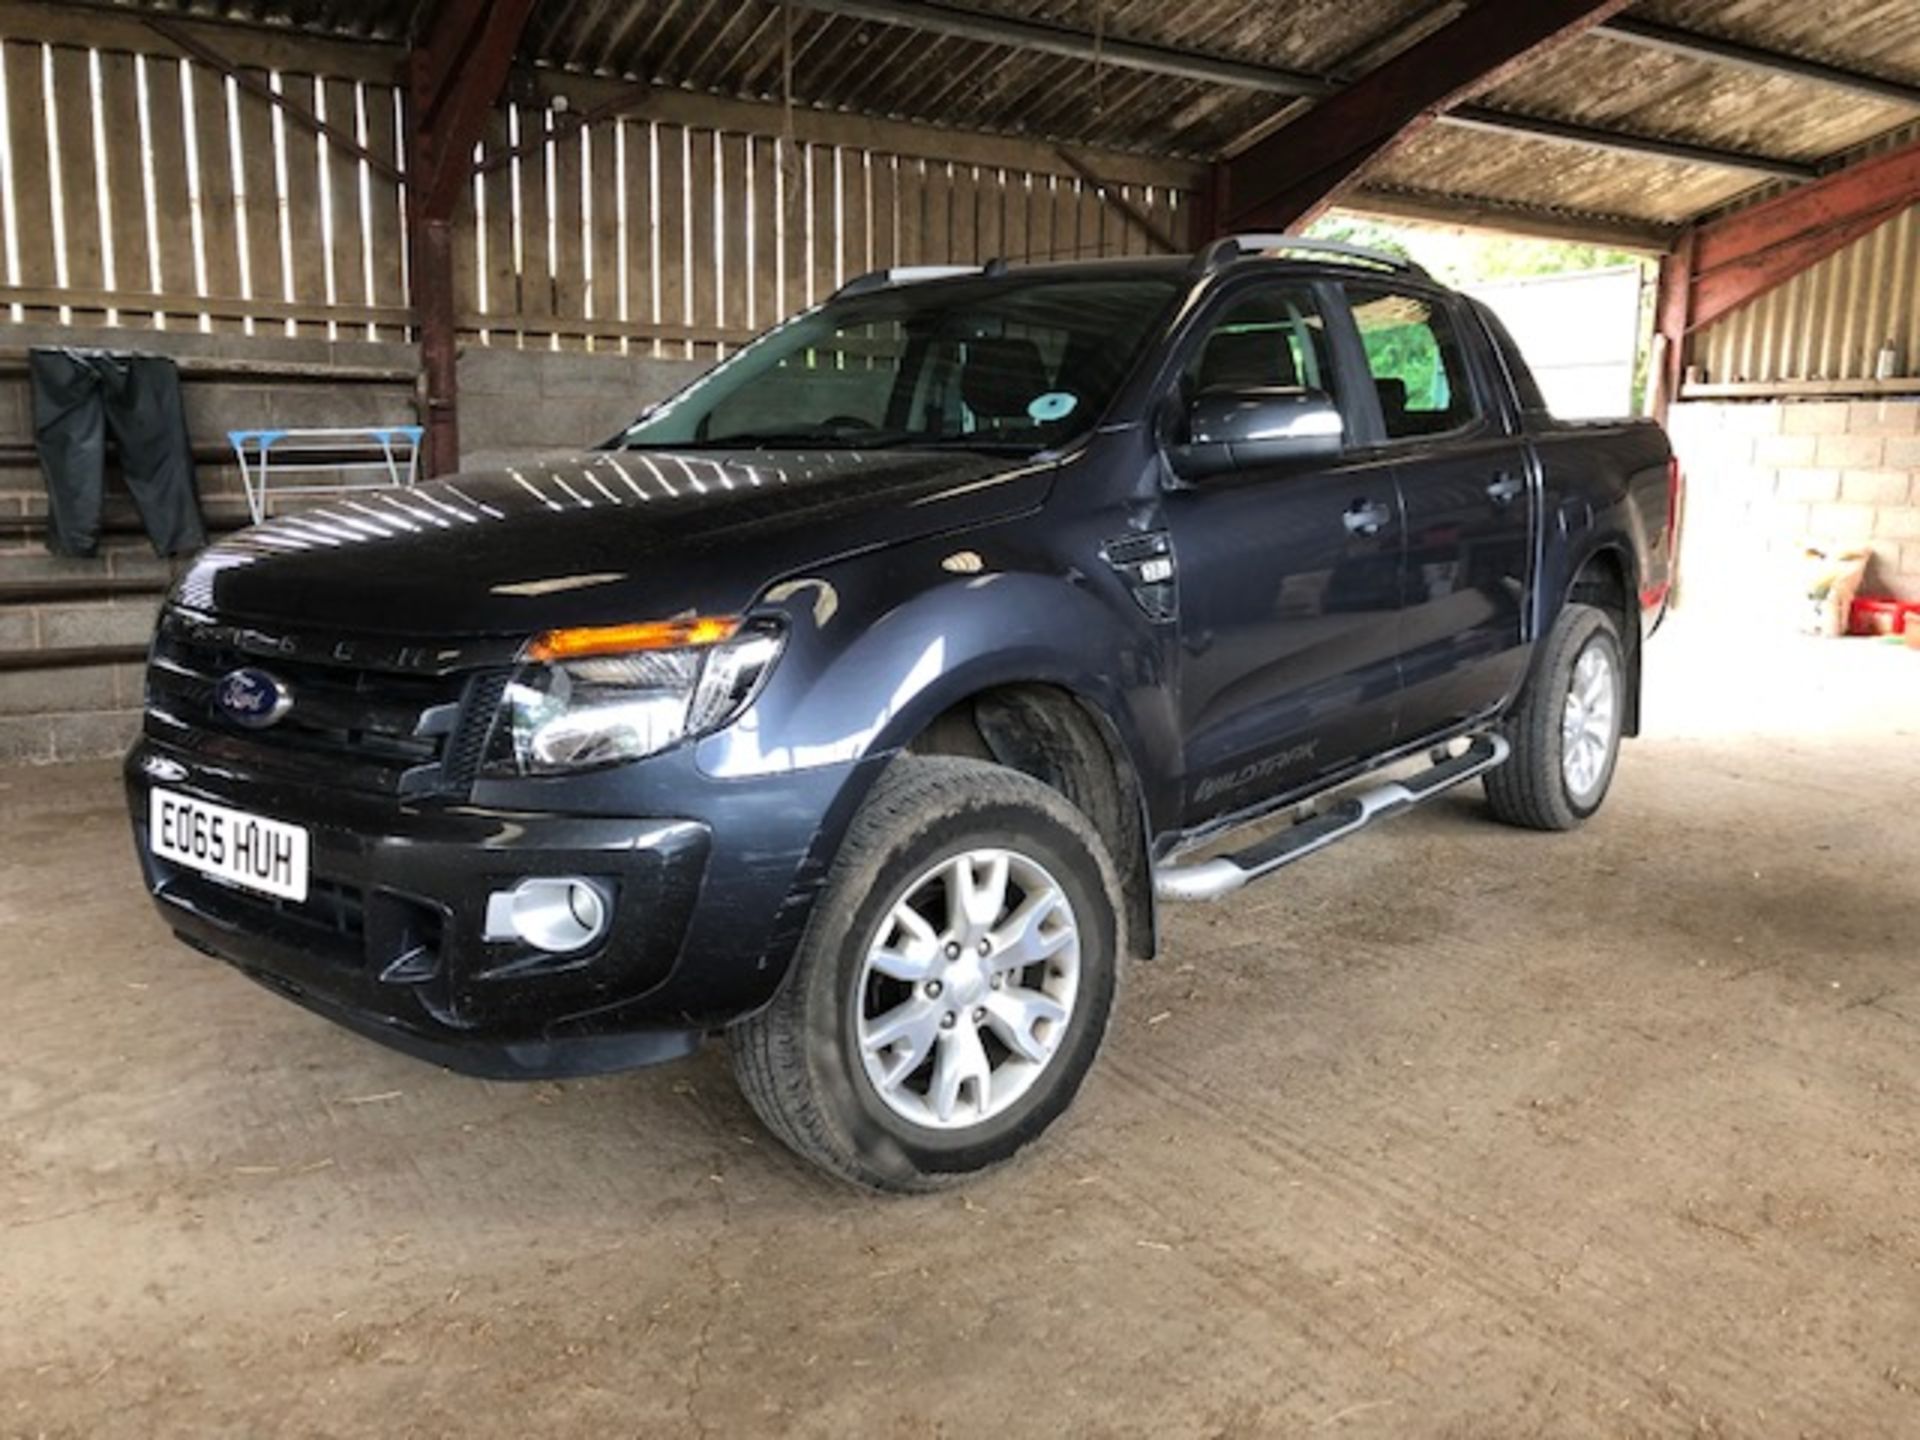 FORD RANGER "WILDCAT"DOUBLE CAB PICK UP - Image 2 of 2